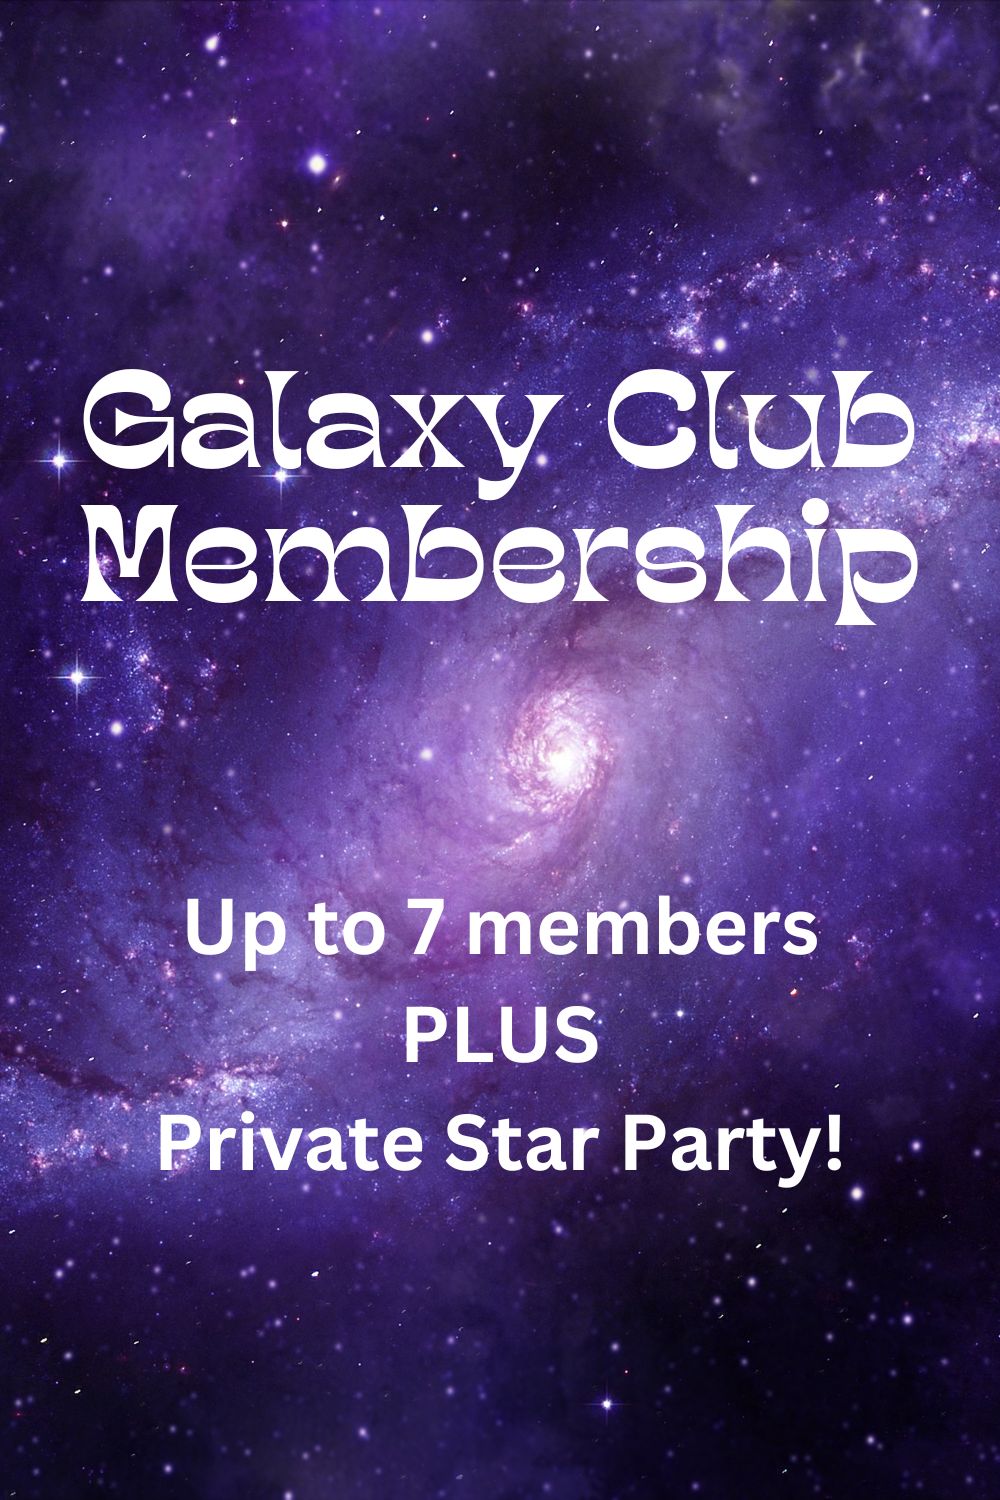 Membership: Galaxy Club (group of up to 7 members + Private Star Party!)